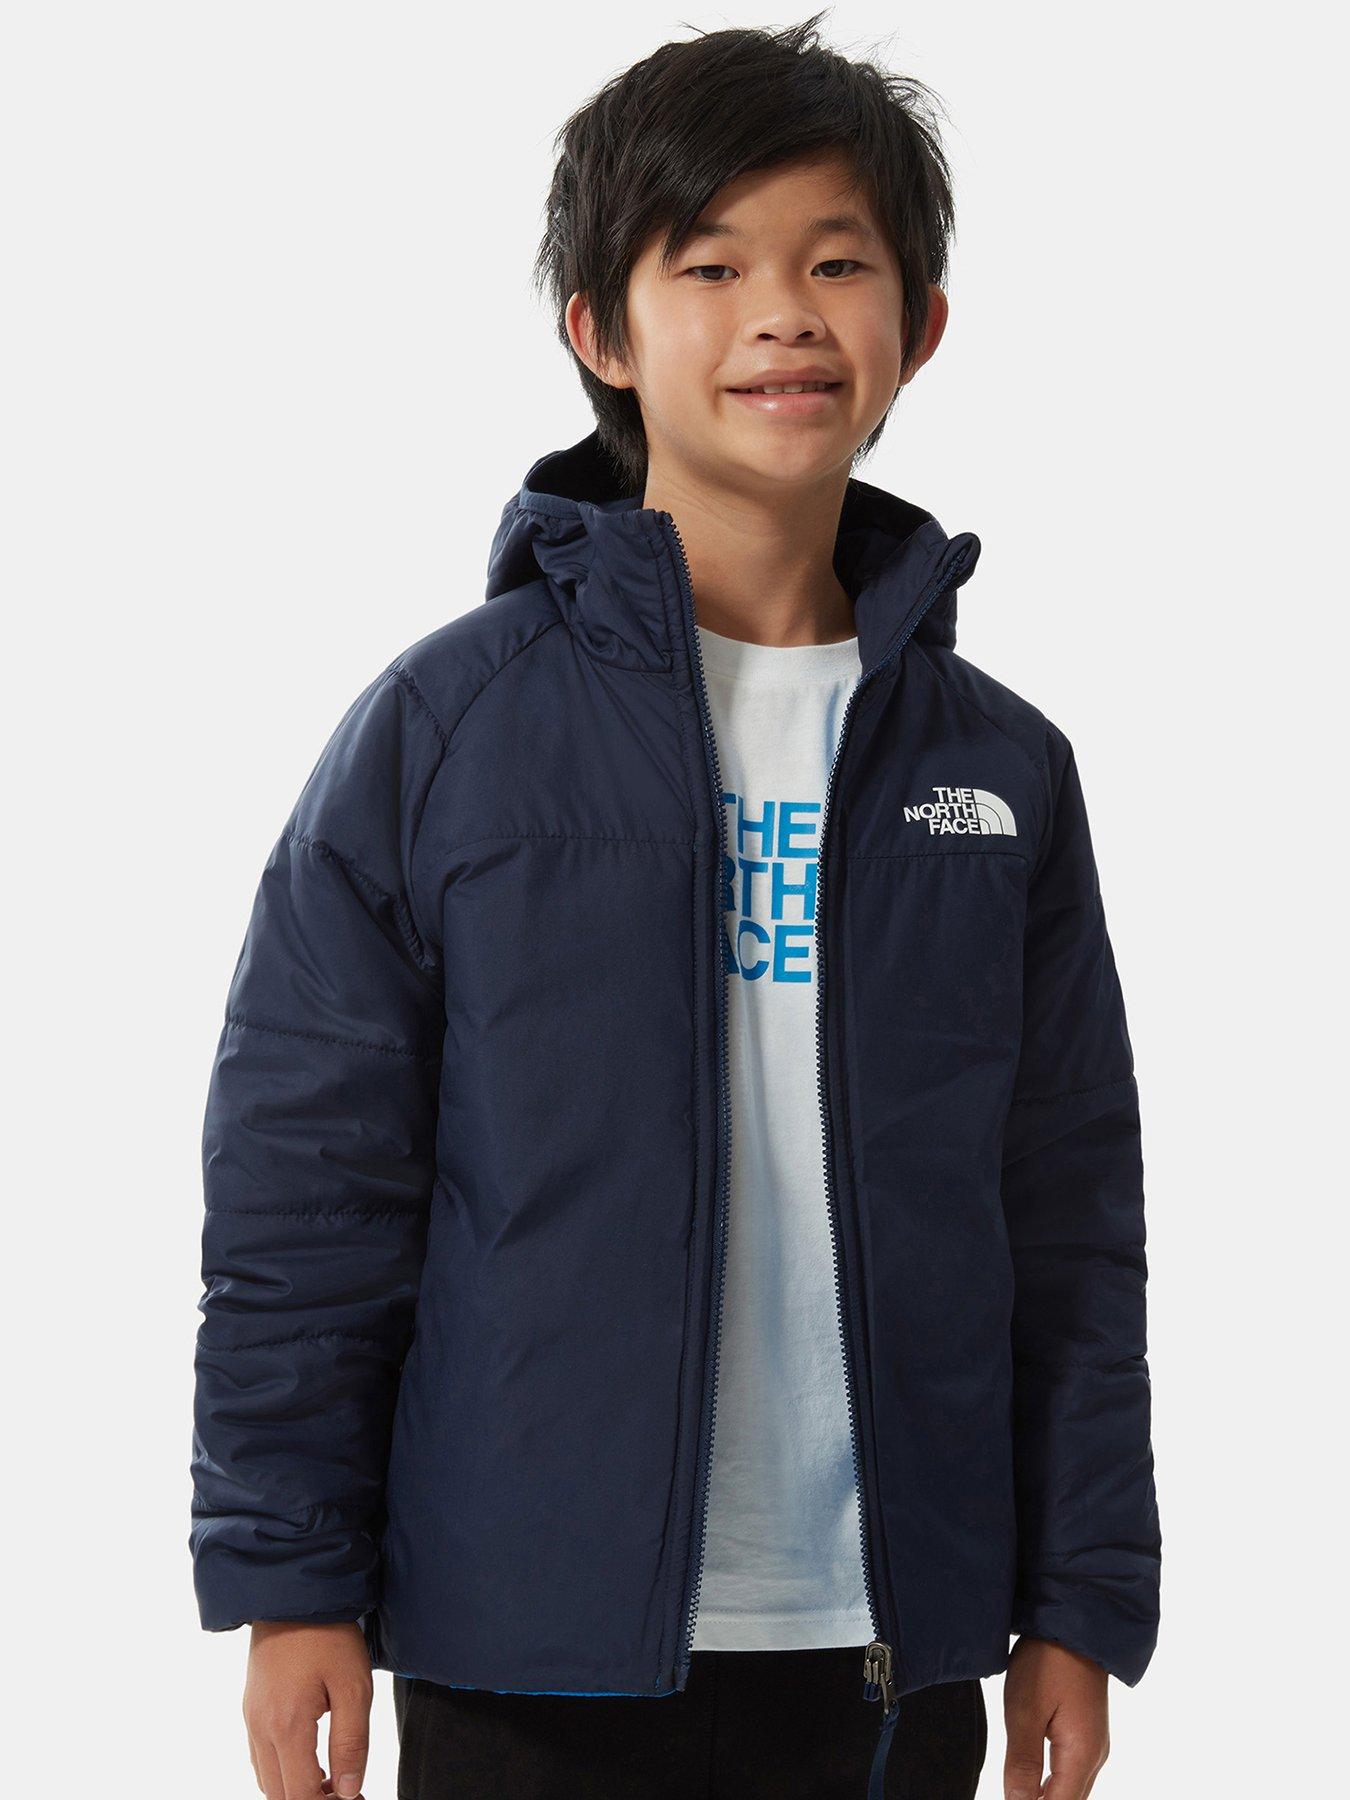 Boys Clothes Youth Boy's Reversible Perrito Insulated Jacket - Blue